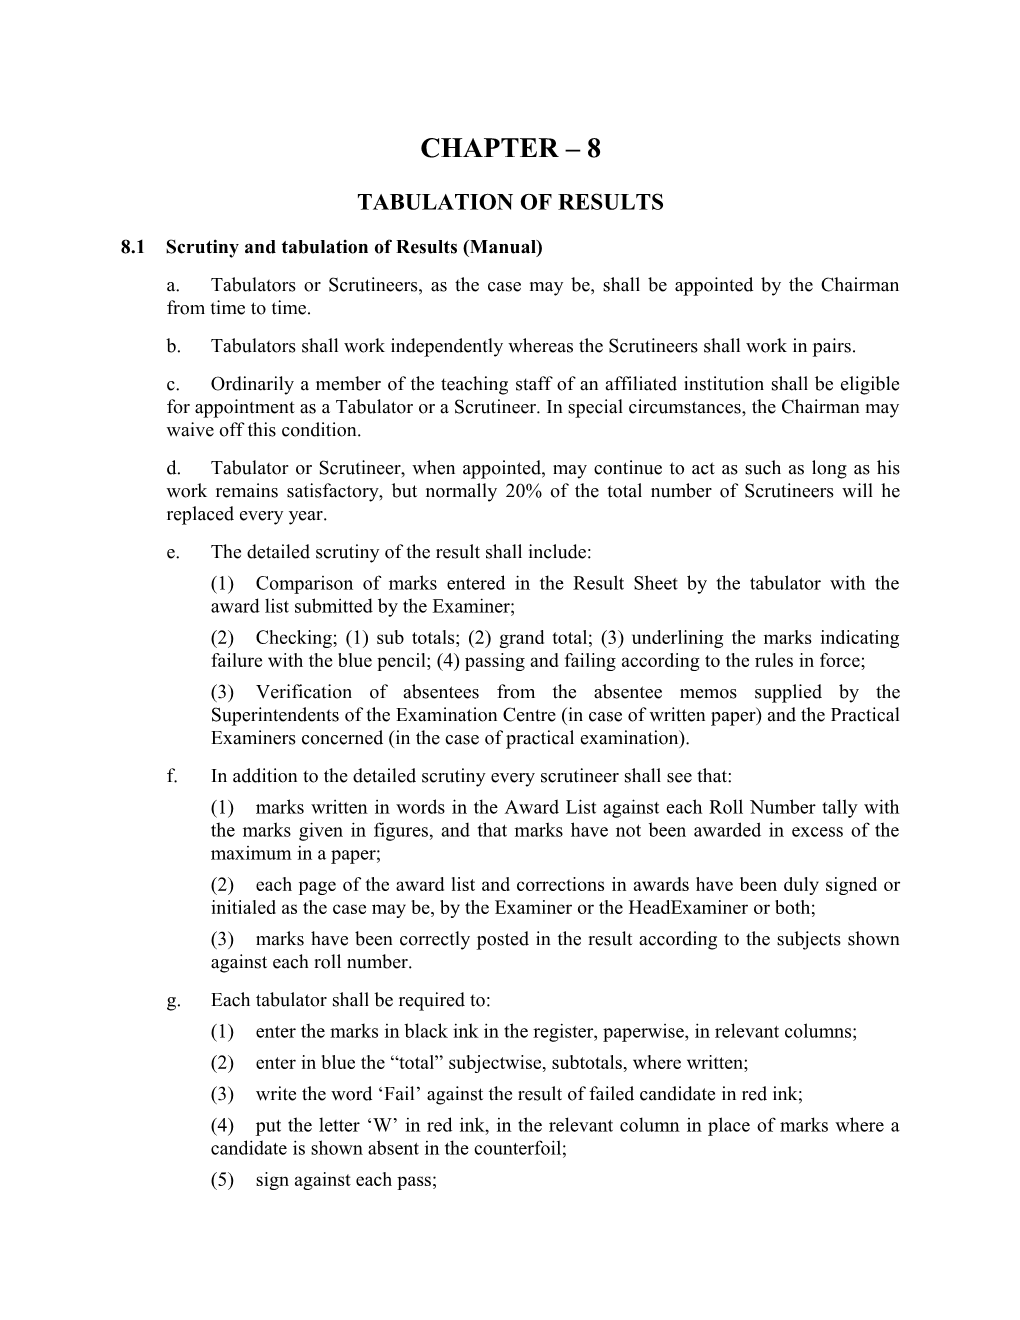 8.1 Scrutiny and Tabulation of Results (Manual)